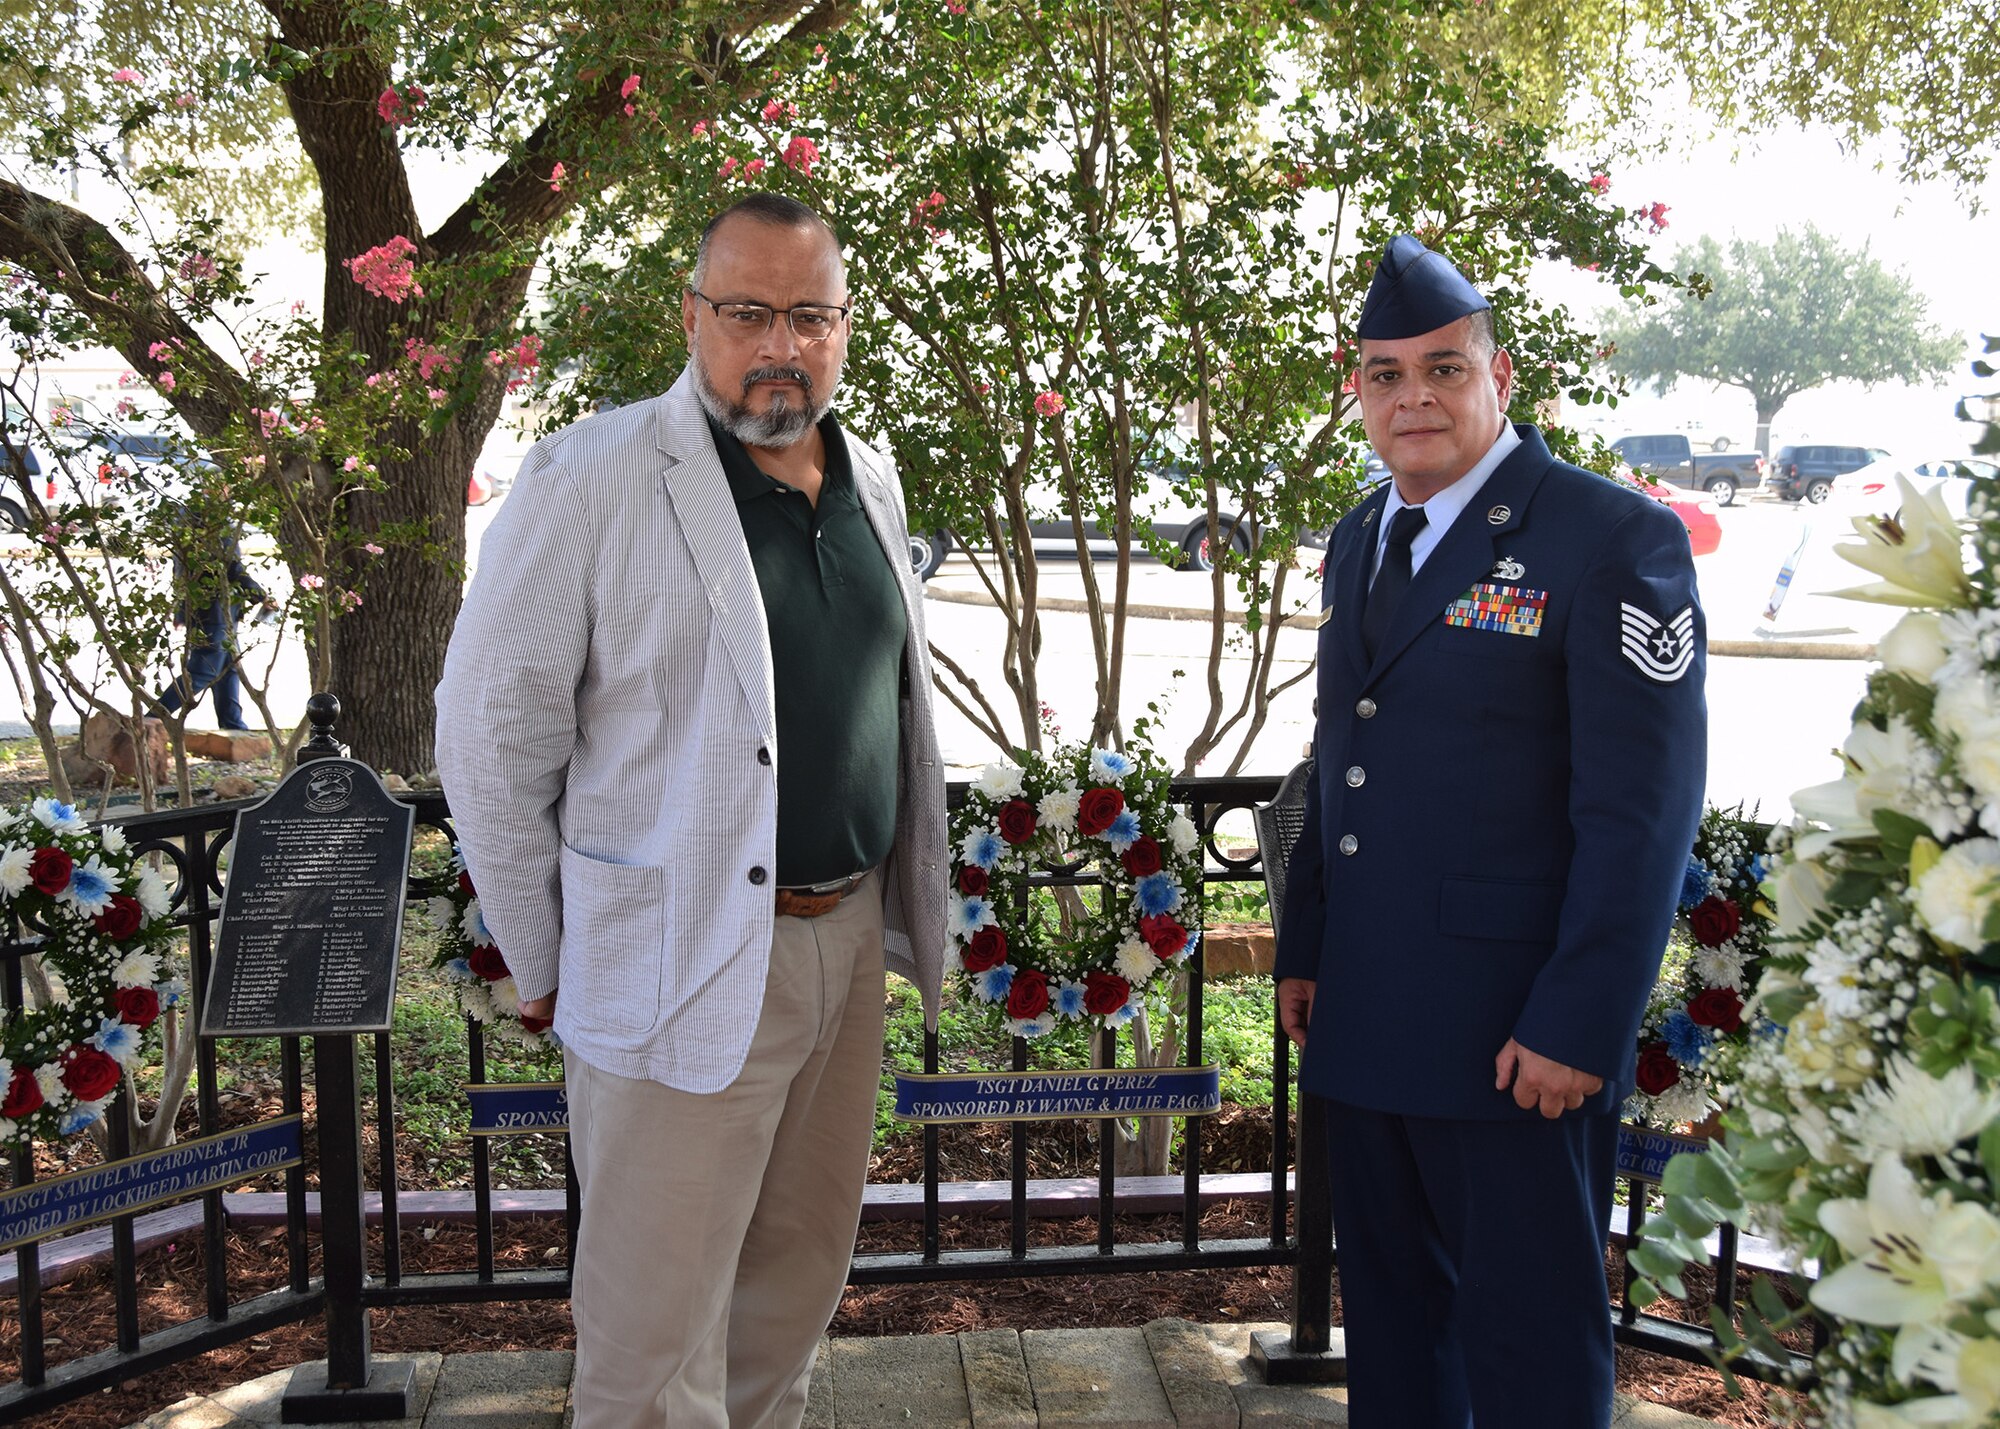 John P. Perez and brother, Tech. Sgt. Joe Perez, 26th Aerial Port Squadron ramp service supervisor, pause for a moment after laying a wreath on the BRAVO-12 memorial during a remembrance ceremony Aug. 28, 2020 at Joint Base San Antonio-Lackland, Texas.